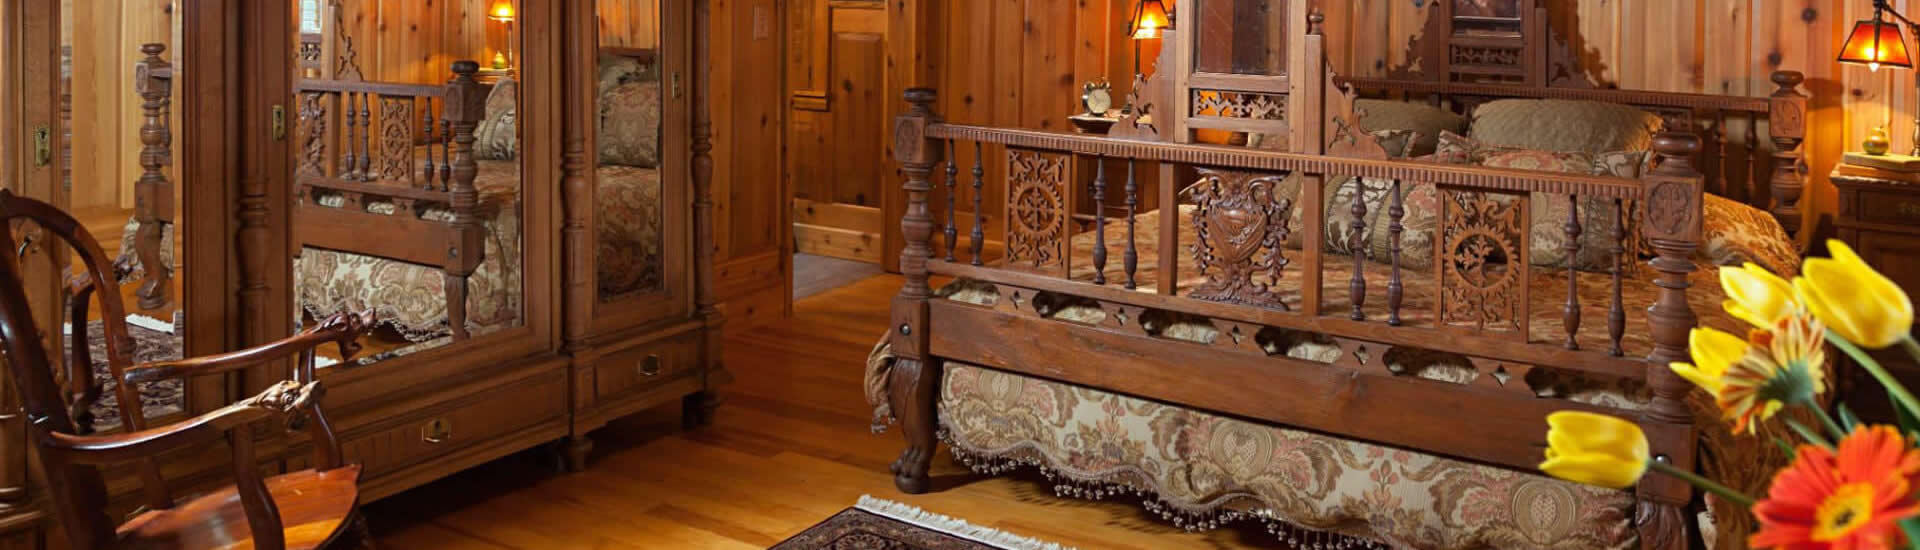 Ornately carved King-sized bed in a wood-paneled room with an enormous wooden armoire and rocking chair